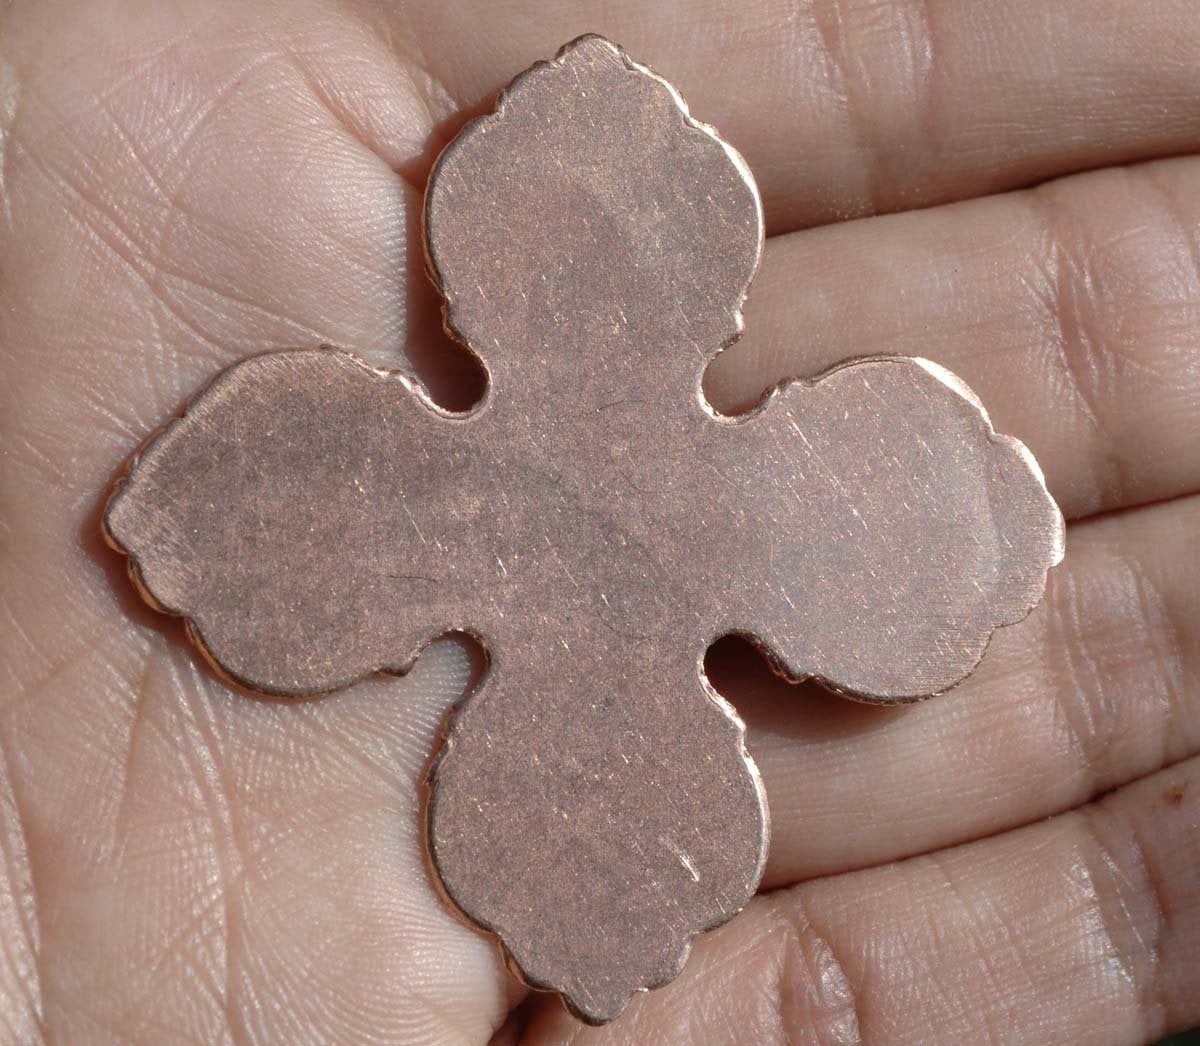 Large cross shapes for making jewelry, square crosses, copper, brass, bronze, nickel silver 20g pendant blanks